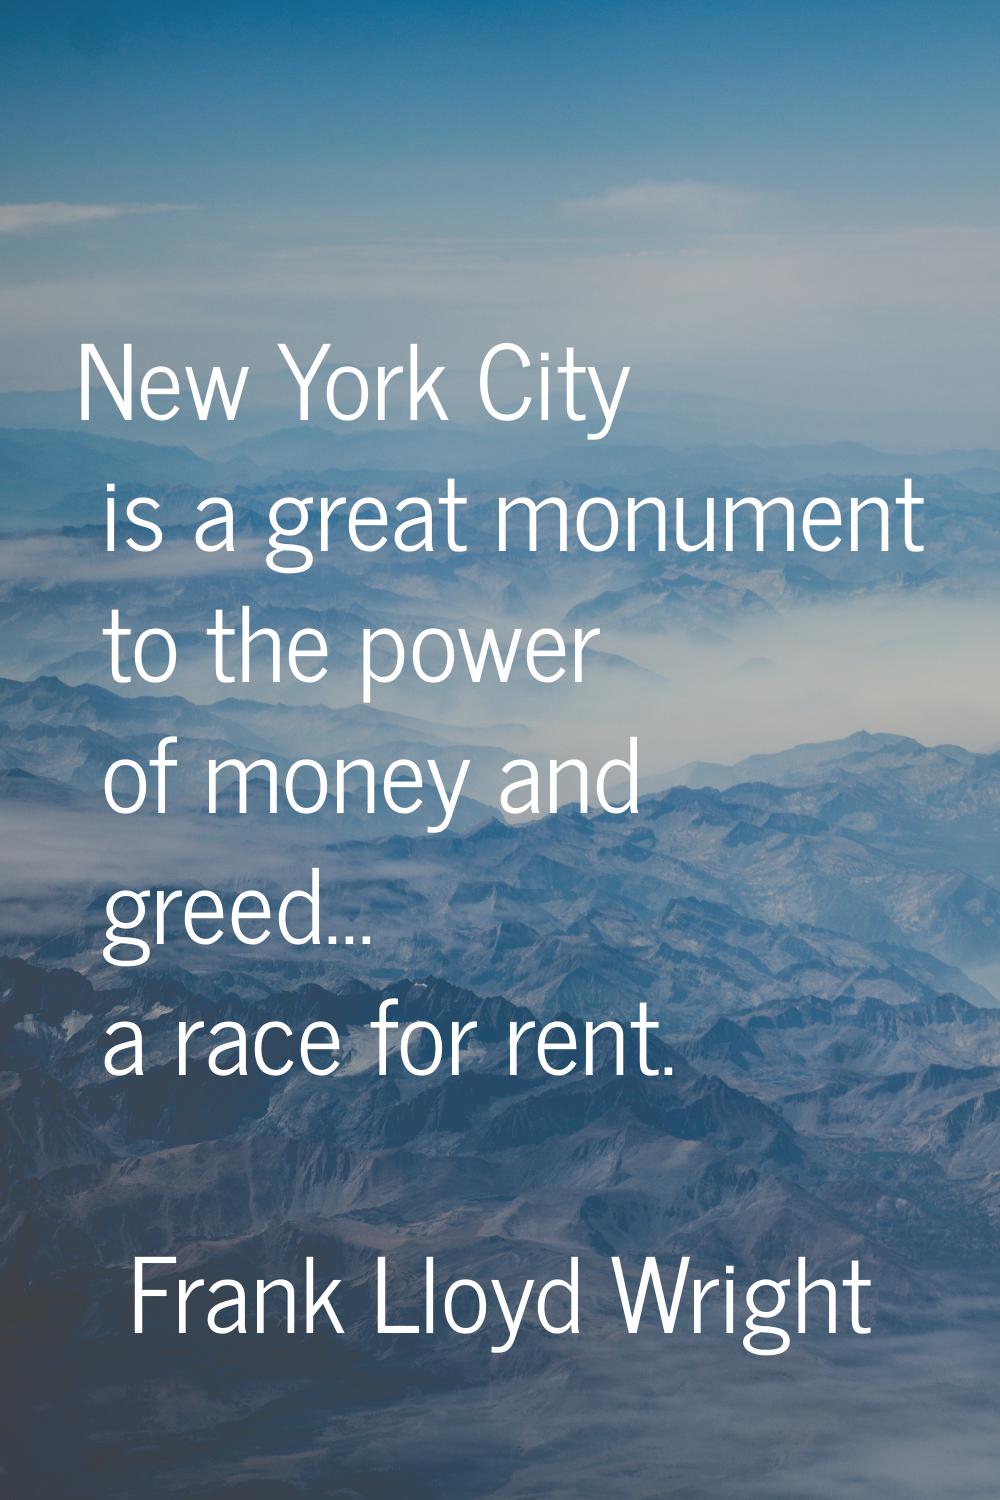 New York City is a great monument to the power of money and greed... a race for rent.